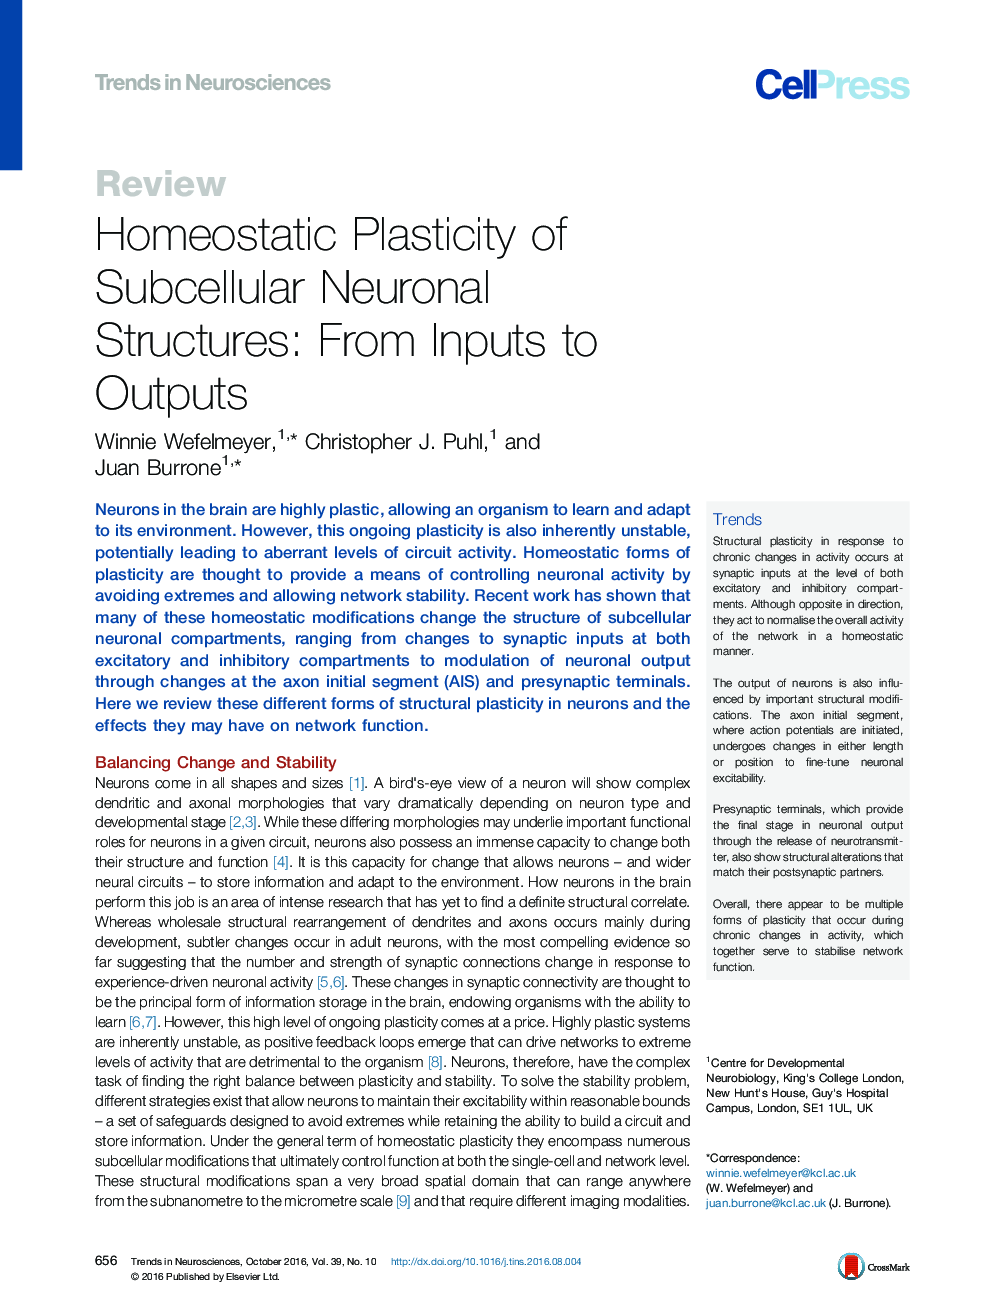 Homeostatic Plasticity of Subcellular Neuronal Structures: From Inputs to Outputs